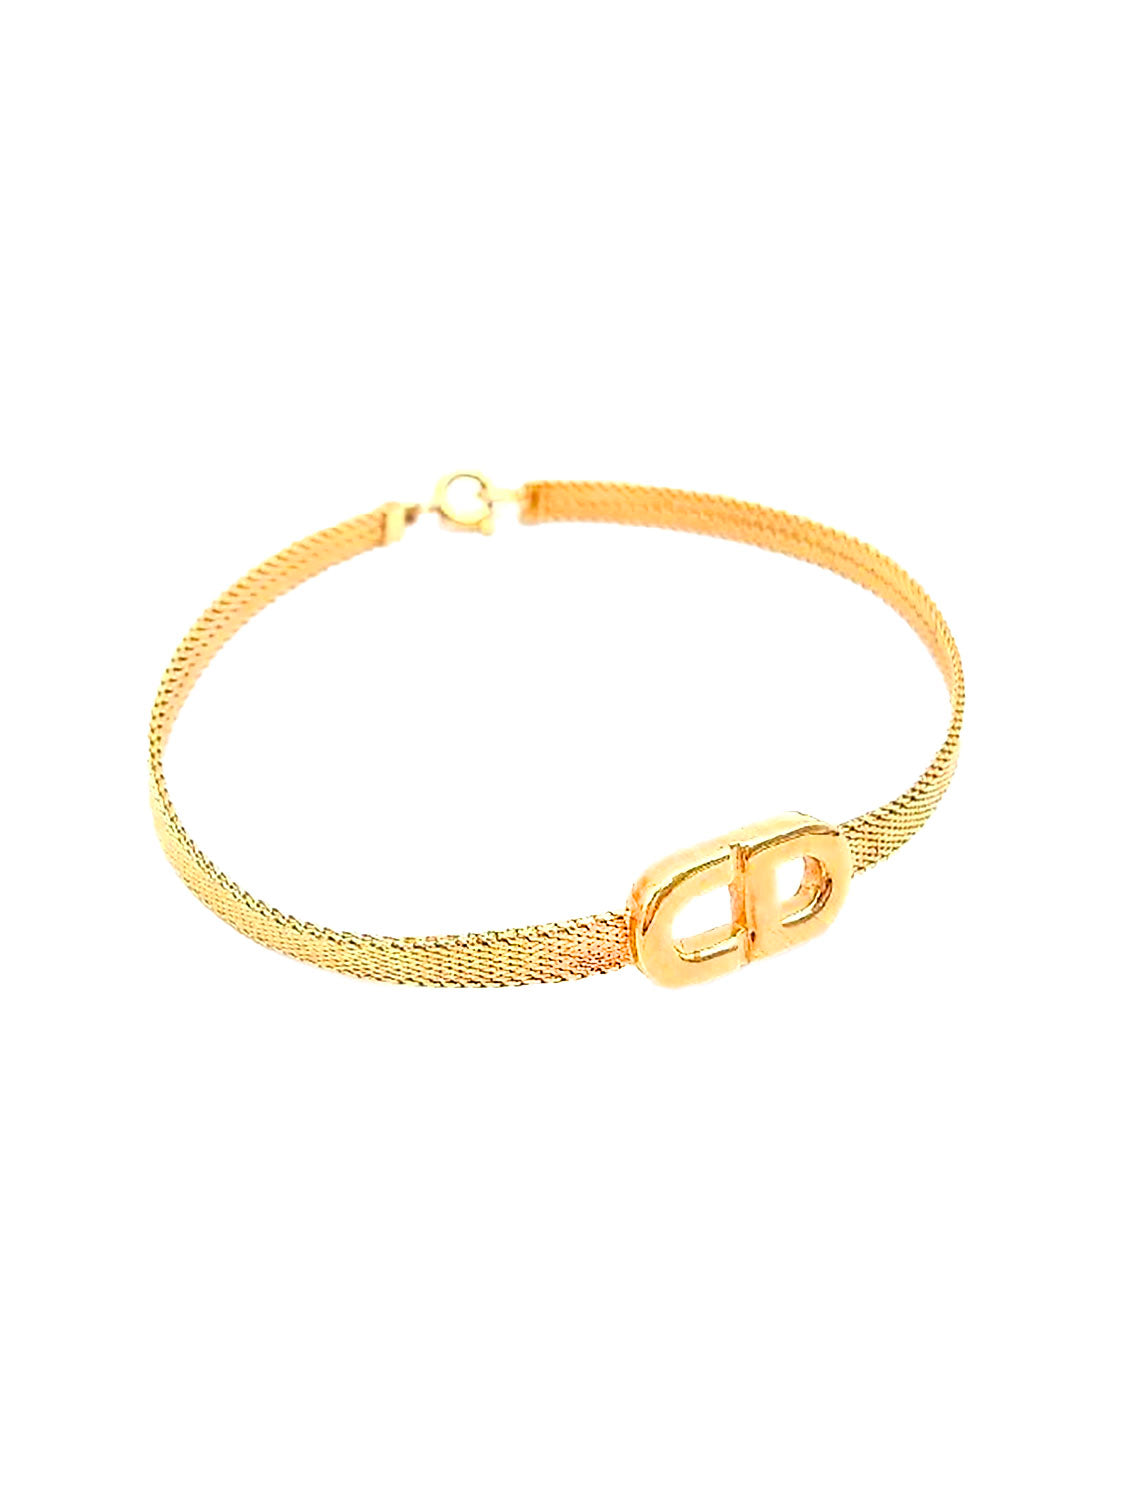 Christian Dior 2000s Gold Mesh CD Choker Necklace